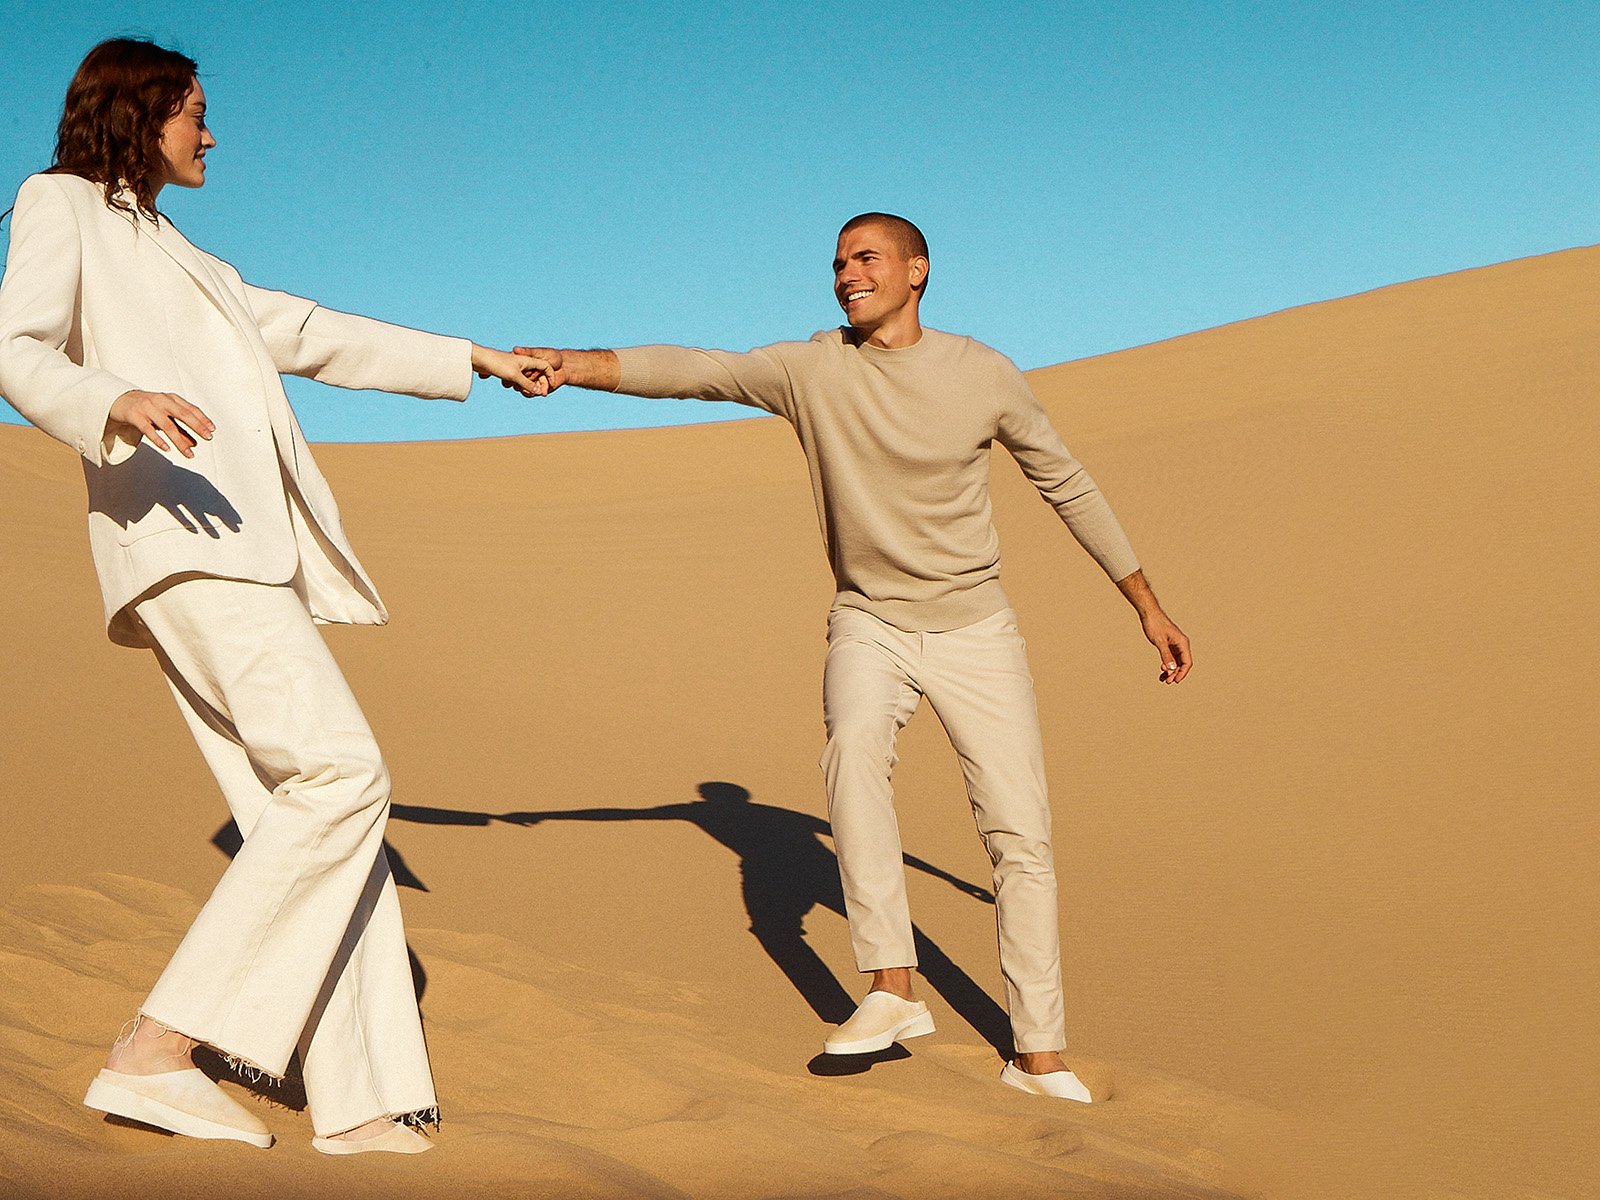 Man and woman in the desert holding hands wearing Cruise Slip on shoes